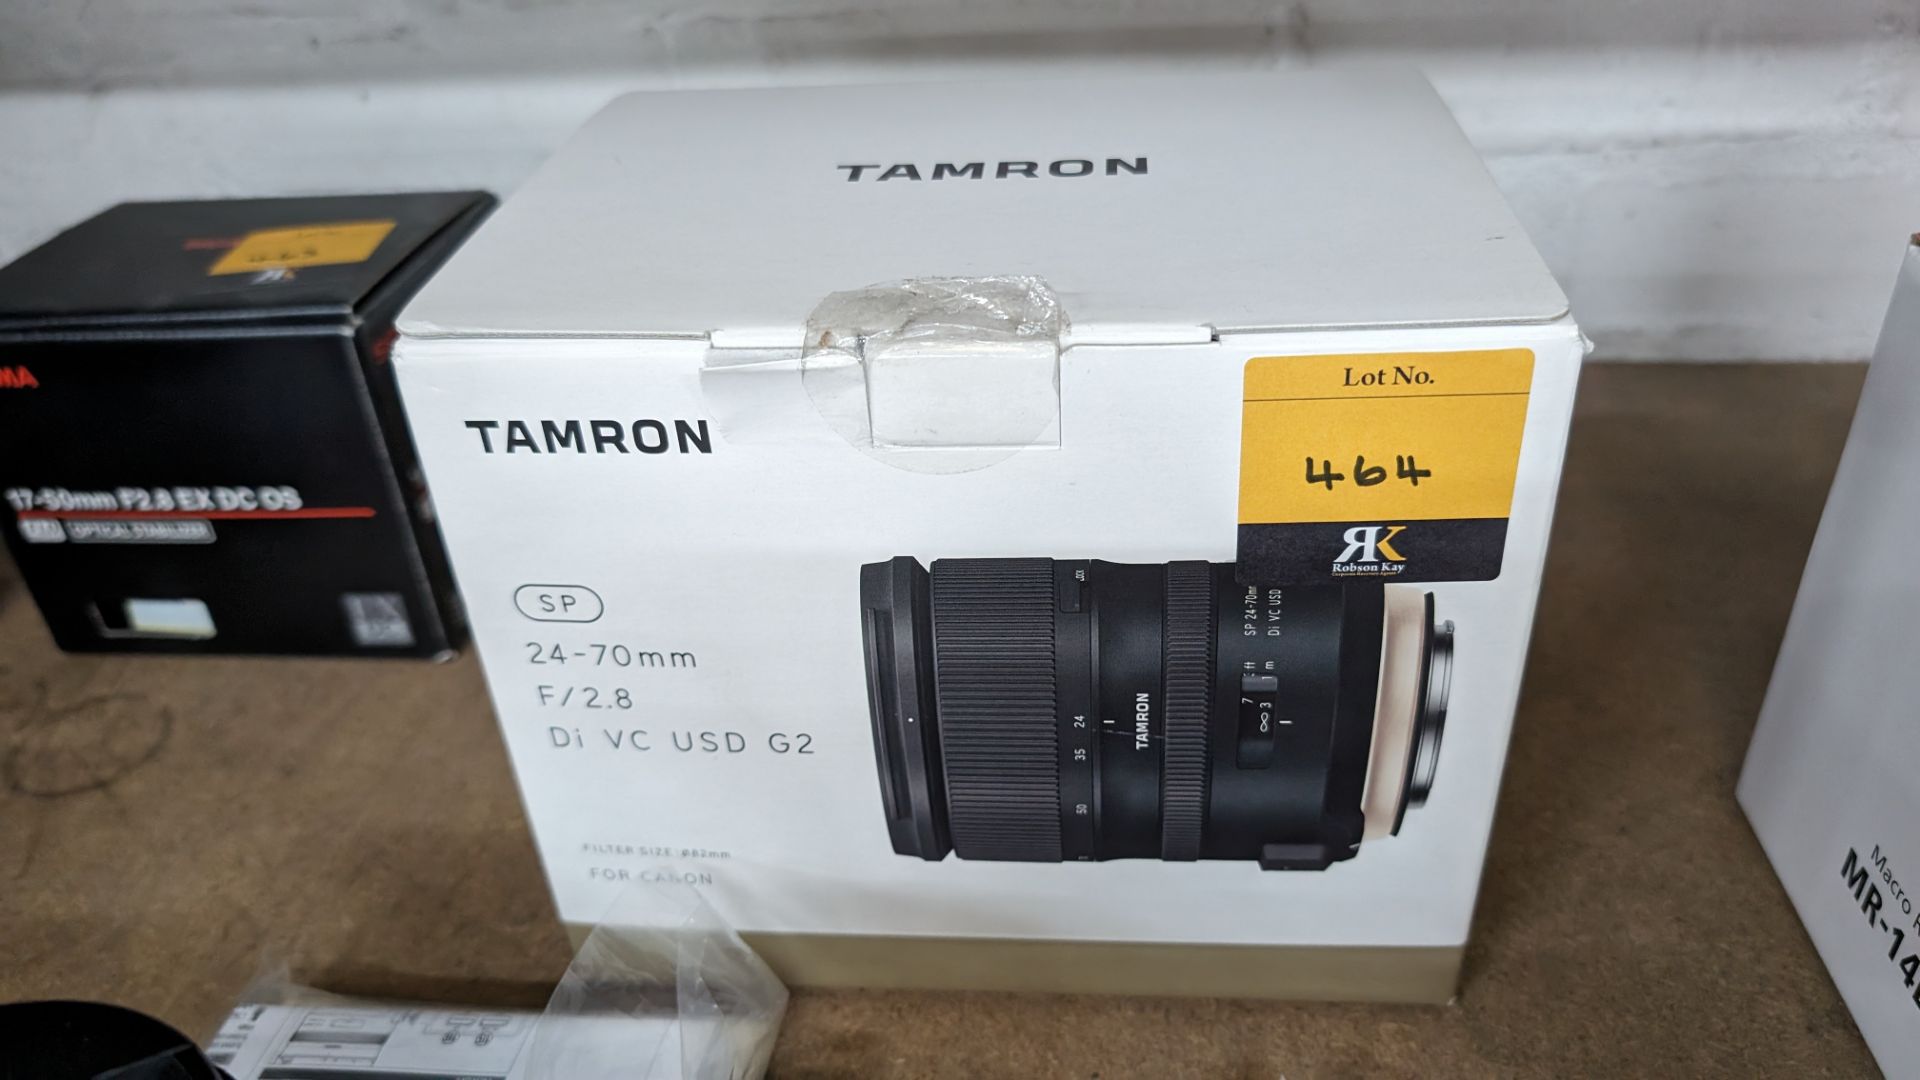 Tamron SP 24-70mm f/2.8 Di VC USD G2 lens, including soft carry case and attachment - Image 6 of 10